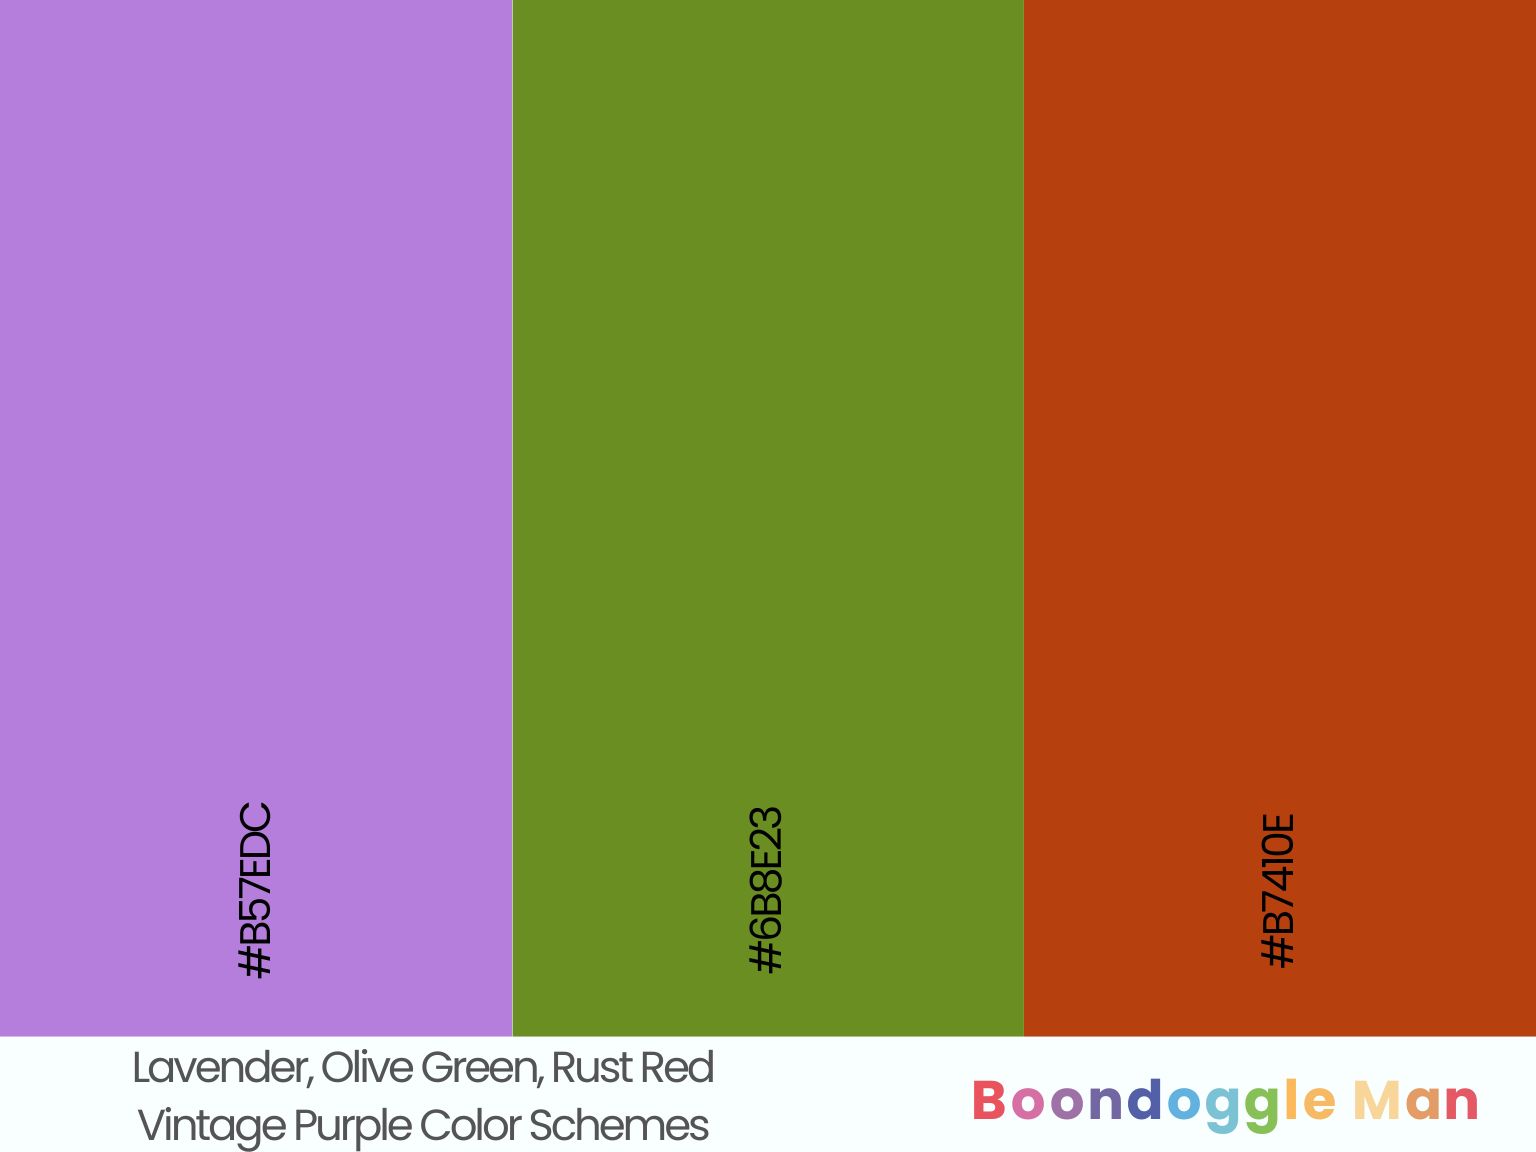 Lavender, Olive Green, Rust Red